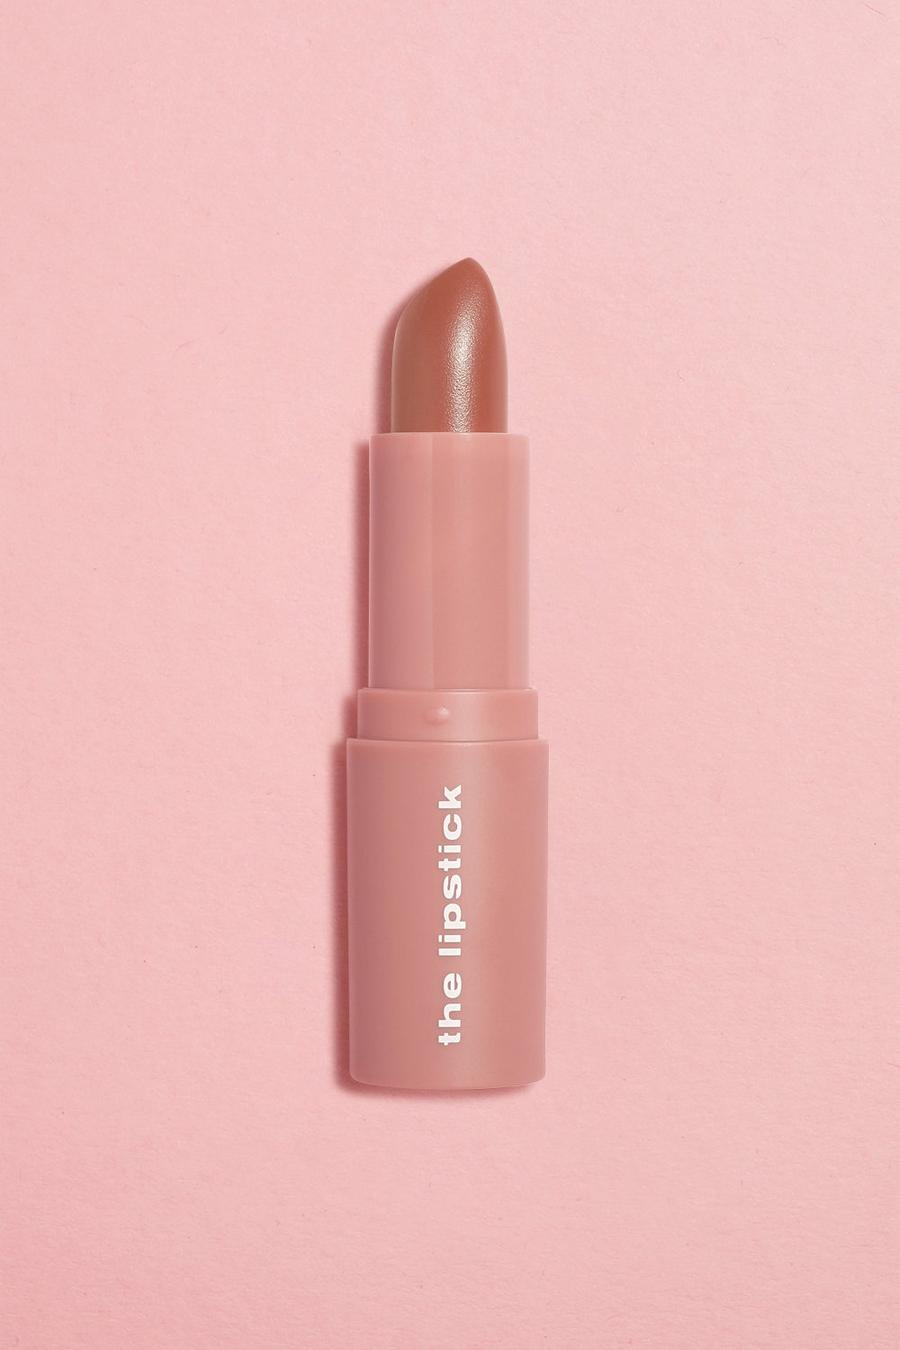 Boohoo Beauty - Rossetto The Lipstick - Pale Nude